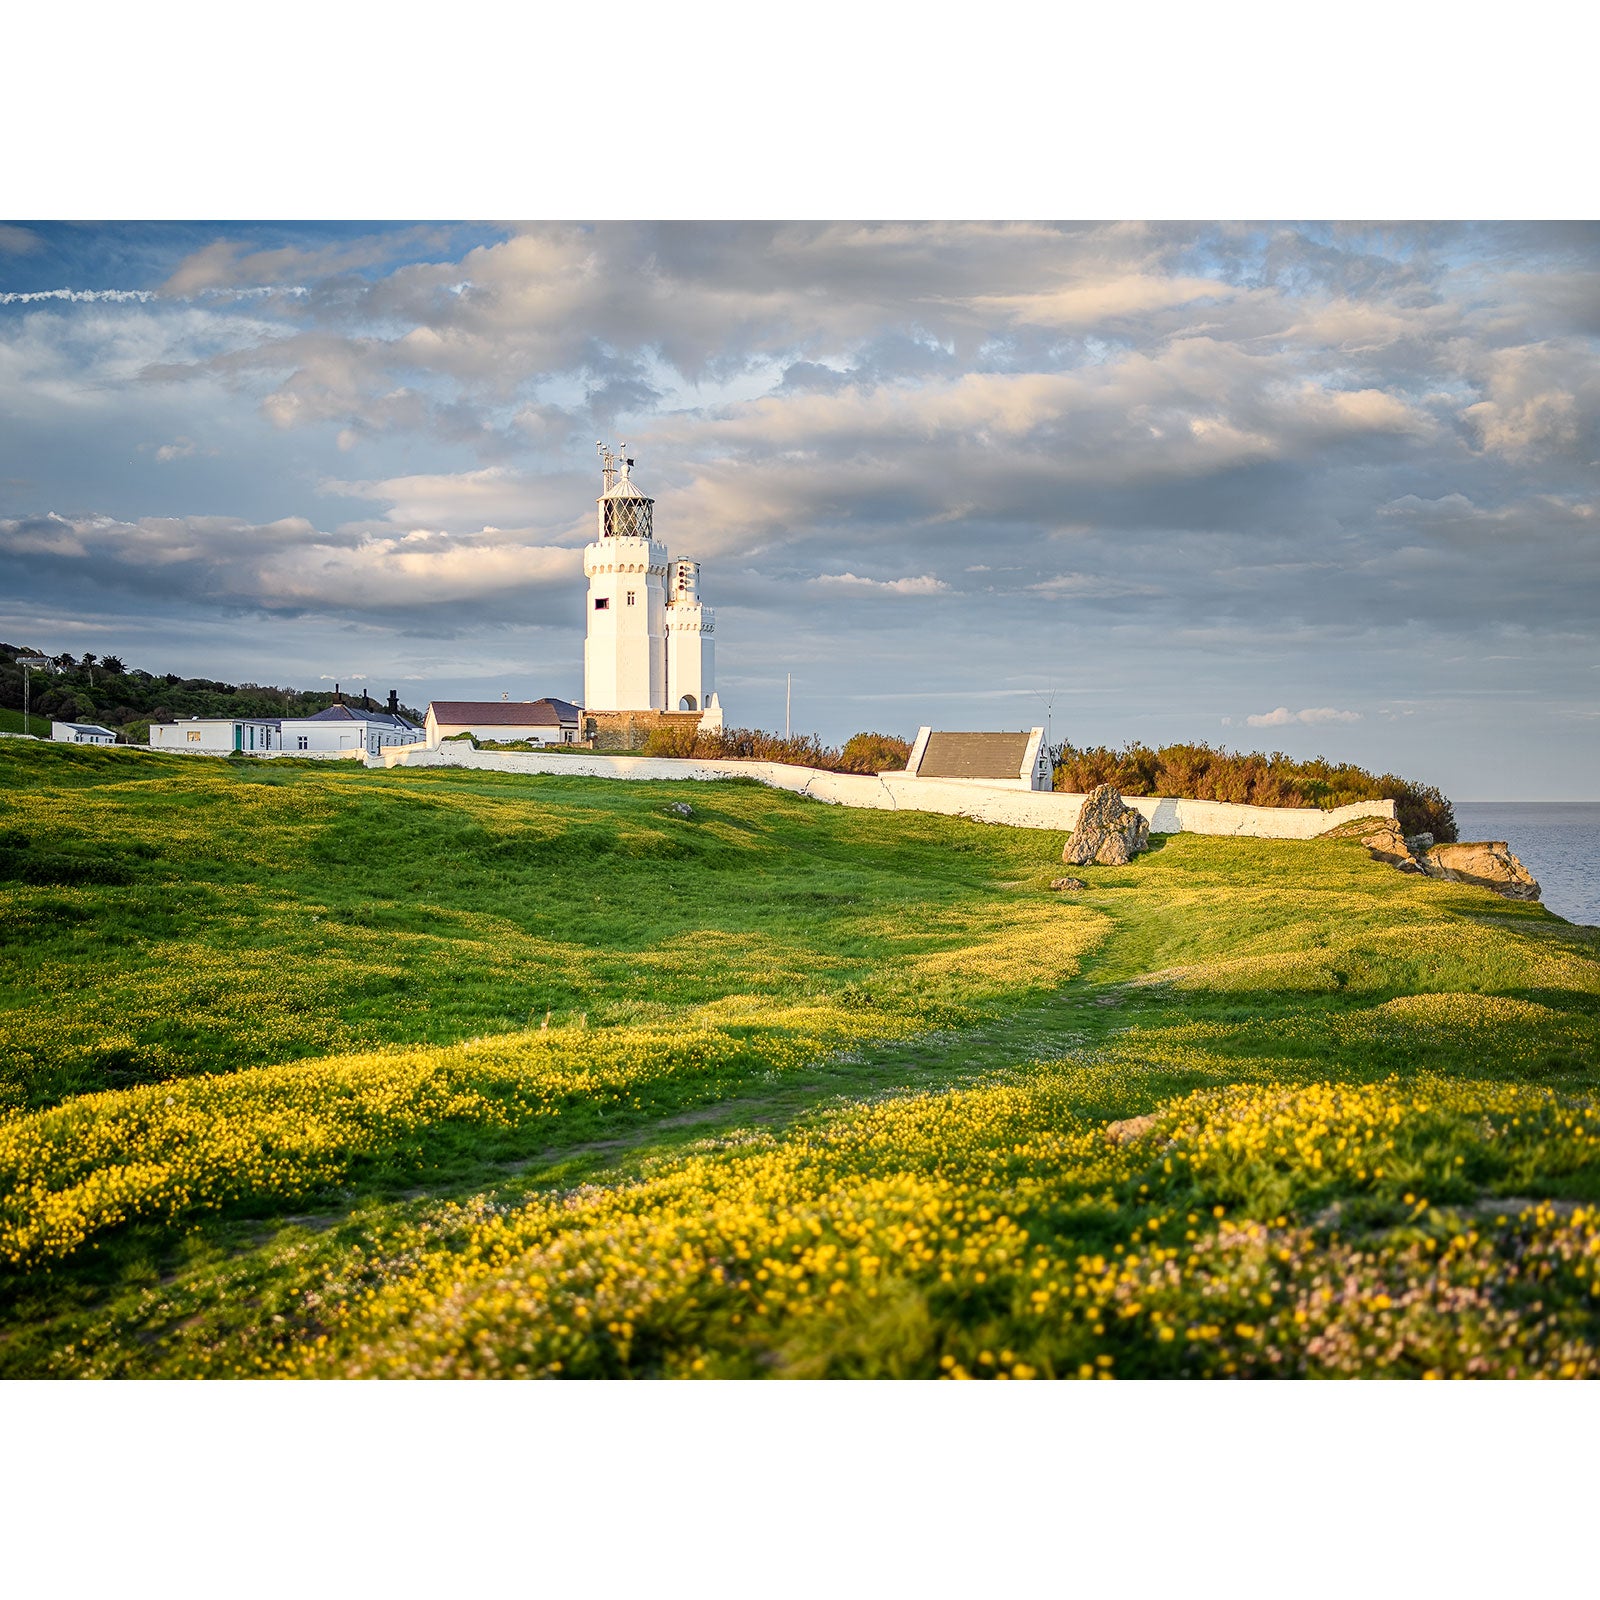 St. Catherine's Lighthouse - Available Light Photography